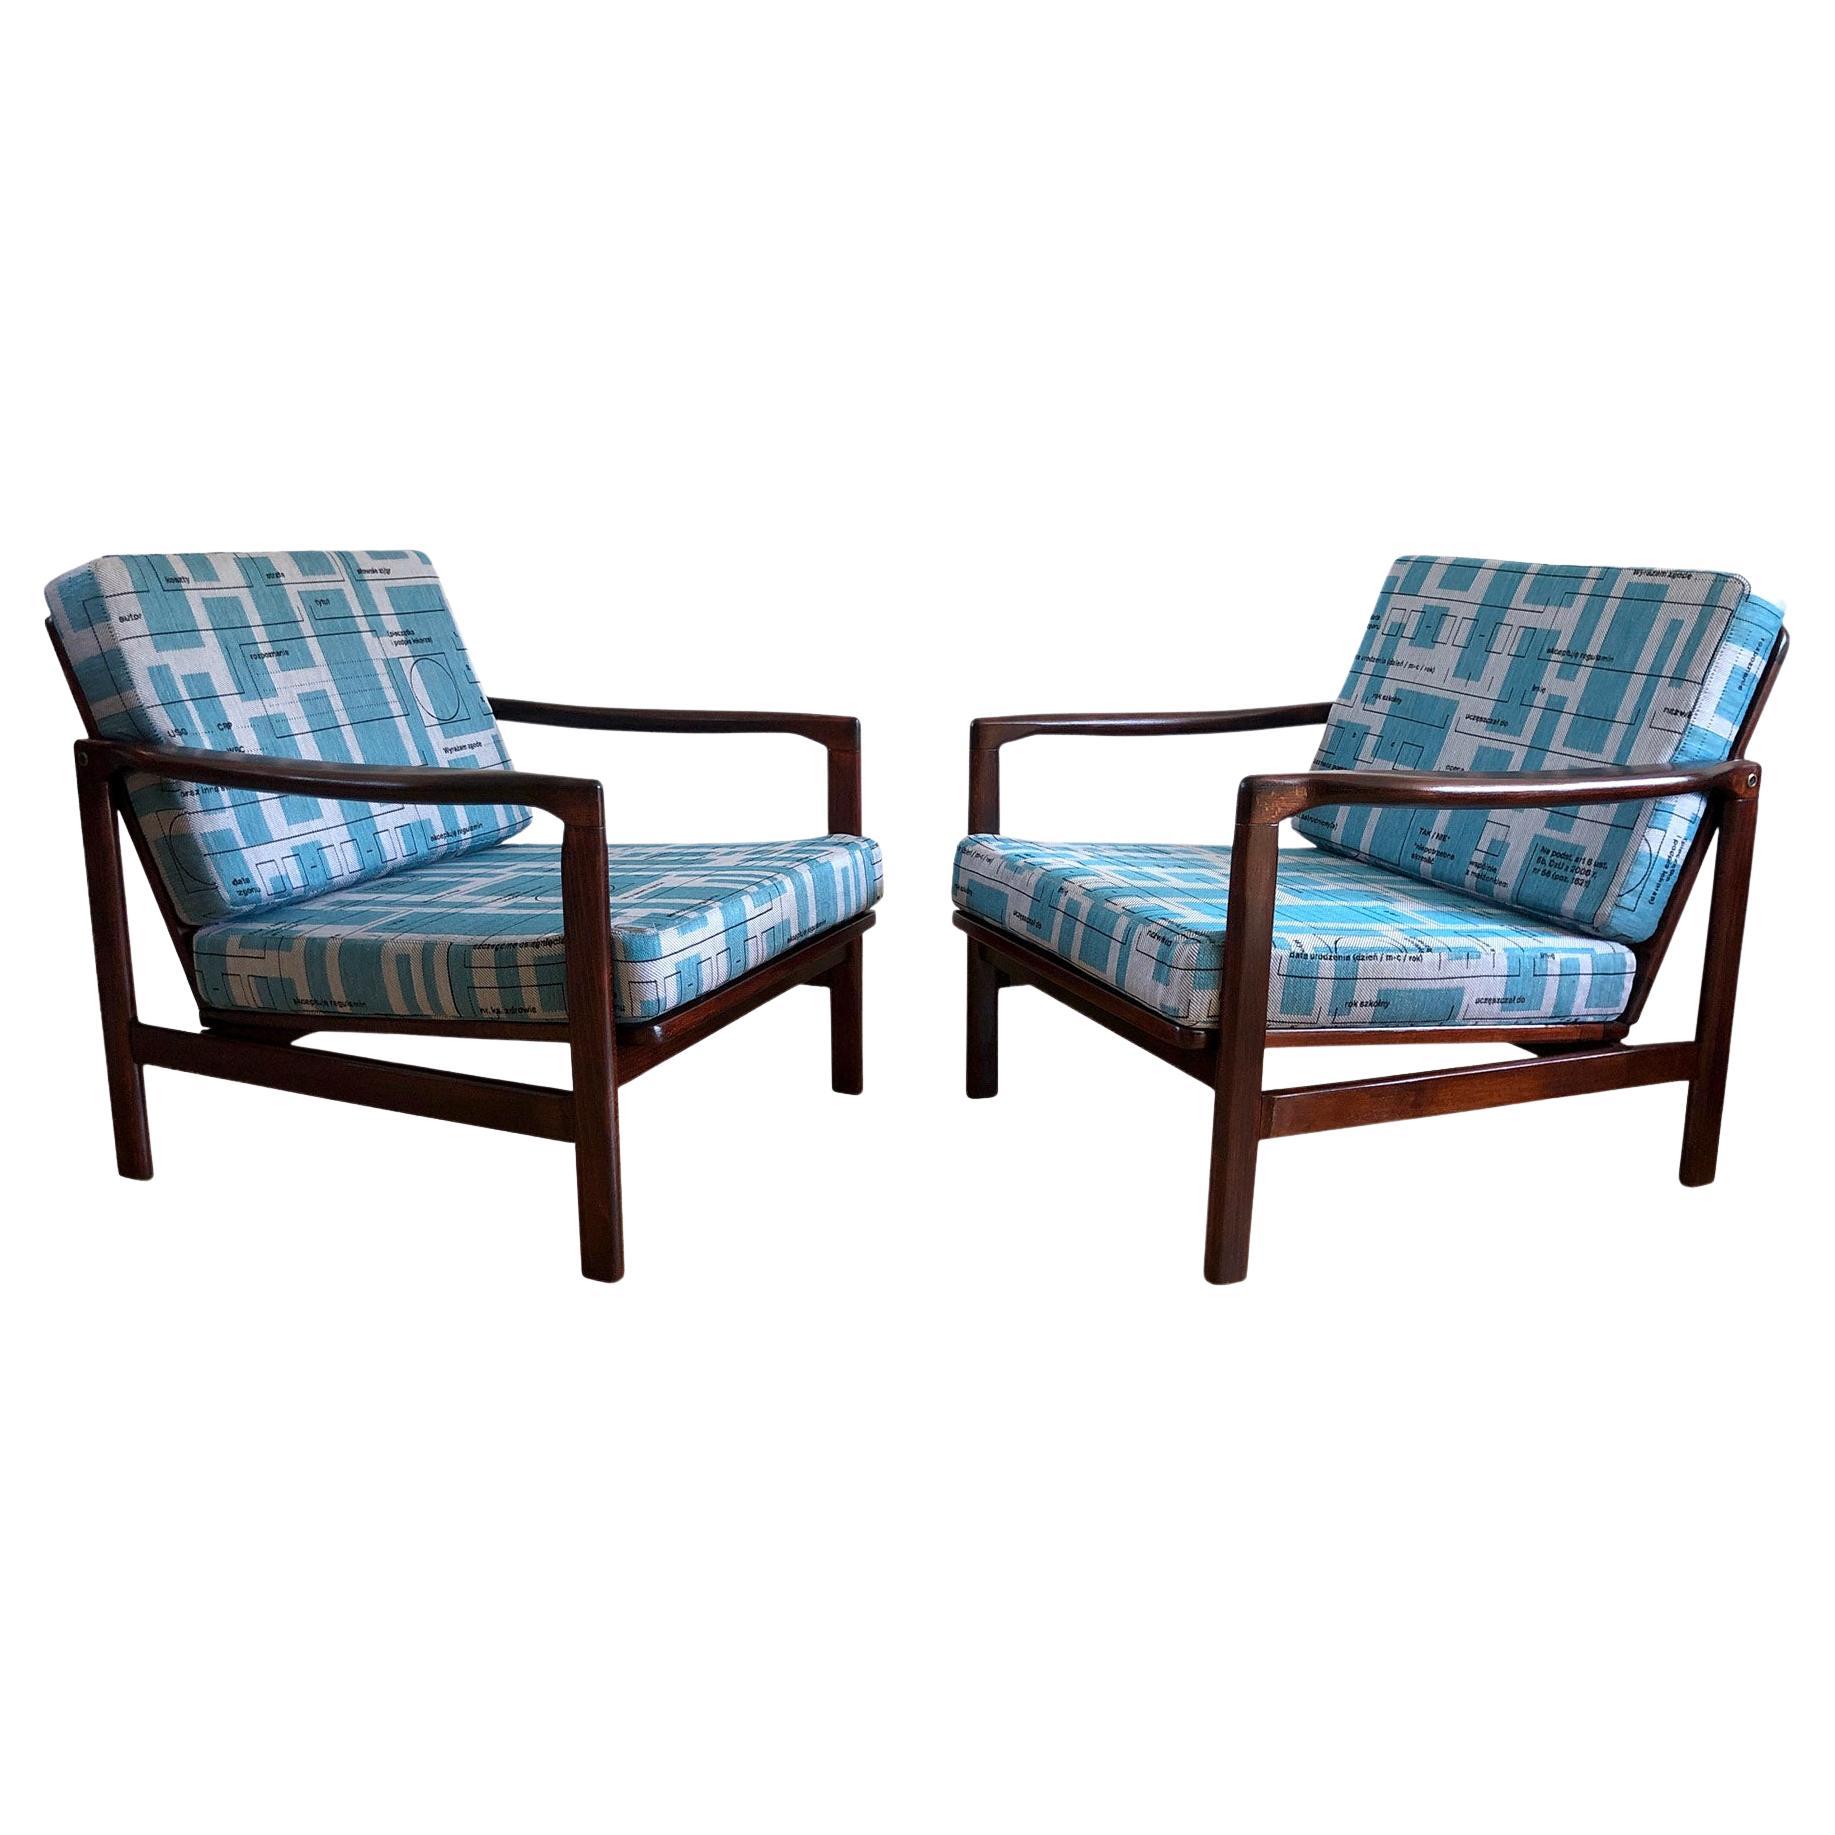 Pair of Blue Jacquard Mid-Century Armchairs by Zenon Bączyk, 1960s For Sale